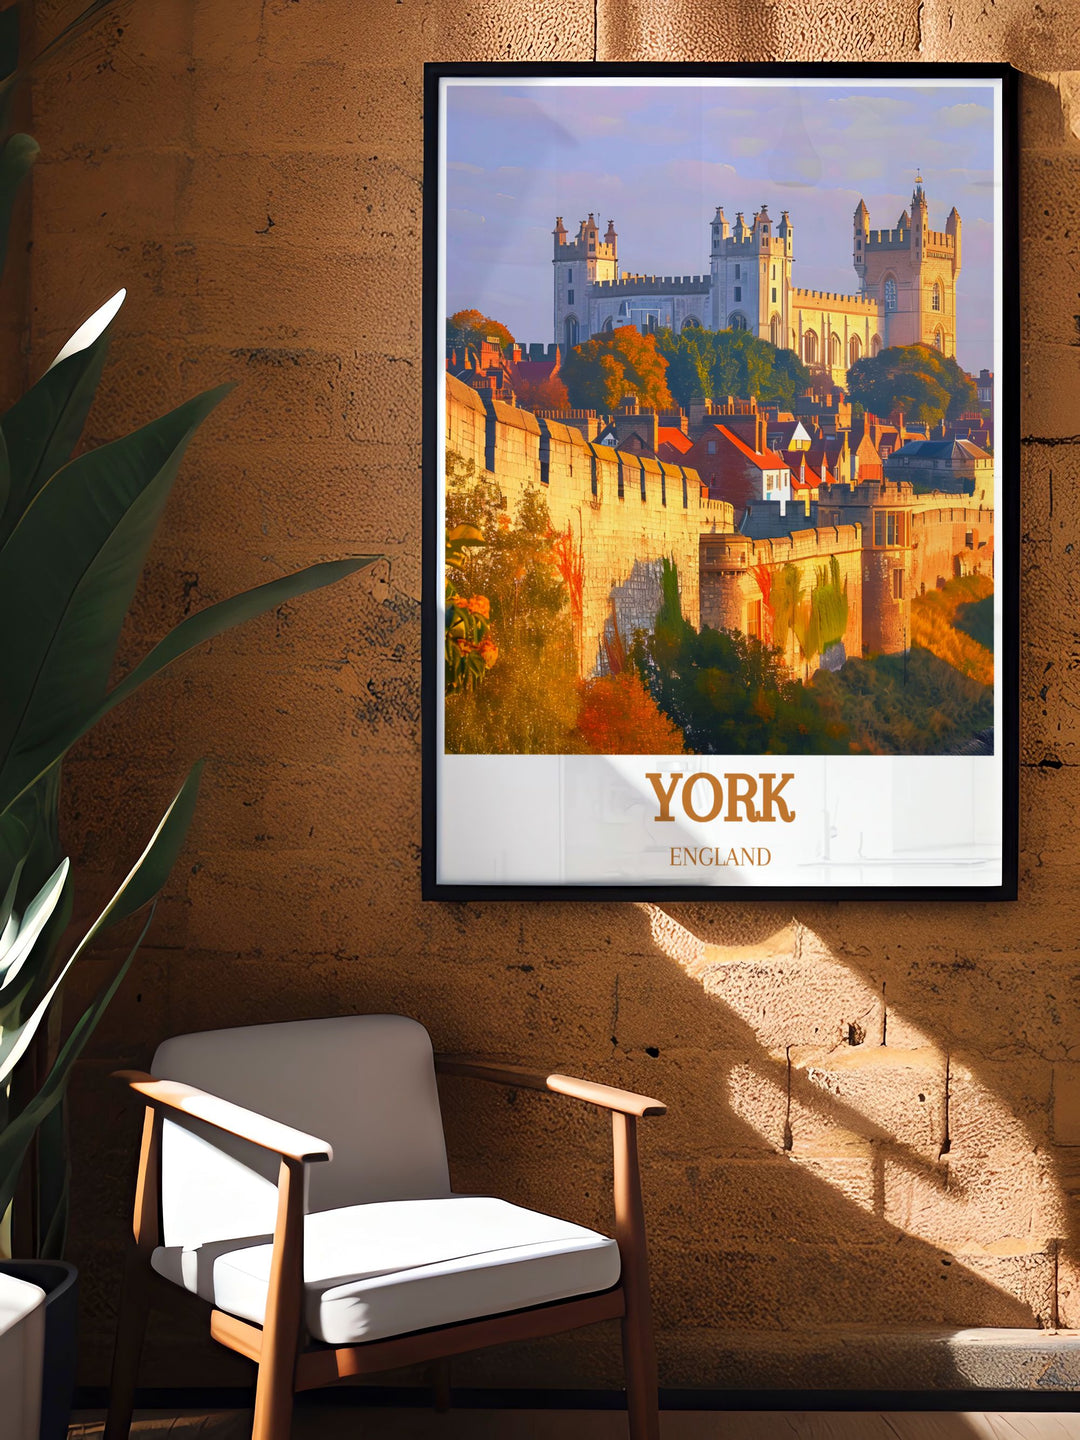 Yorkshire Wolds Art depicting the scenic beauty of North Yorkshire. This art piece blends natural landscapes with historical ENGLAND, york city walls elements for a captivating addition to any room.